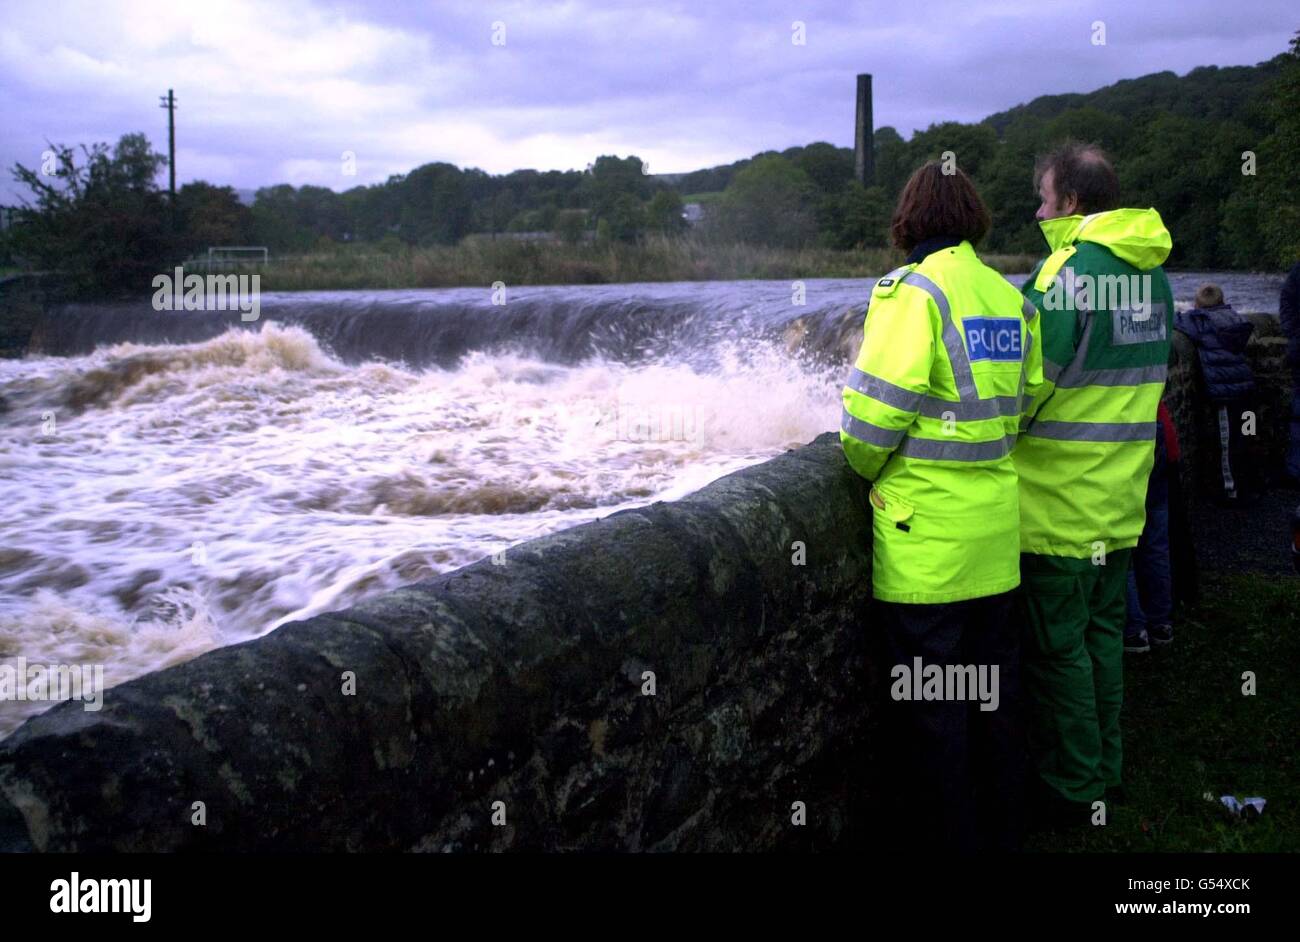 Members of the emergency services look at the weir of the River Ribble, which is downstream from Stainforth Beck, near Settle, North Yorkshire, where two school girls where swept away earlier in the day. 08/03/02 : An inquest jury at Harrogate Magistrates Court decided the deaths of two teenage girls, Rochelle Cauvet, 14, and 13-year-old Hannah Black, were an accident, Friday 8 March, 2002, recording a verdict of accidental death. They heard how the two girls were washed away while taking part in a river walk in Stainforth Beck, near Settle, North Yorkshire on October 10, 2000. Stock Photo